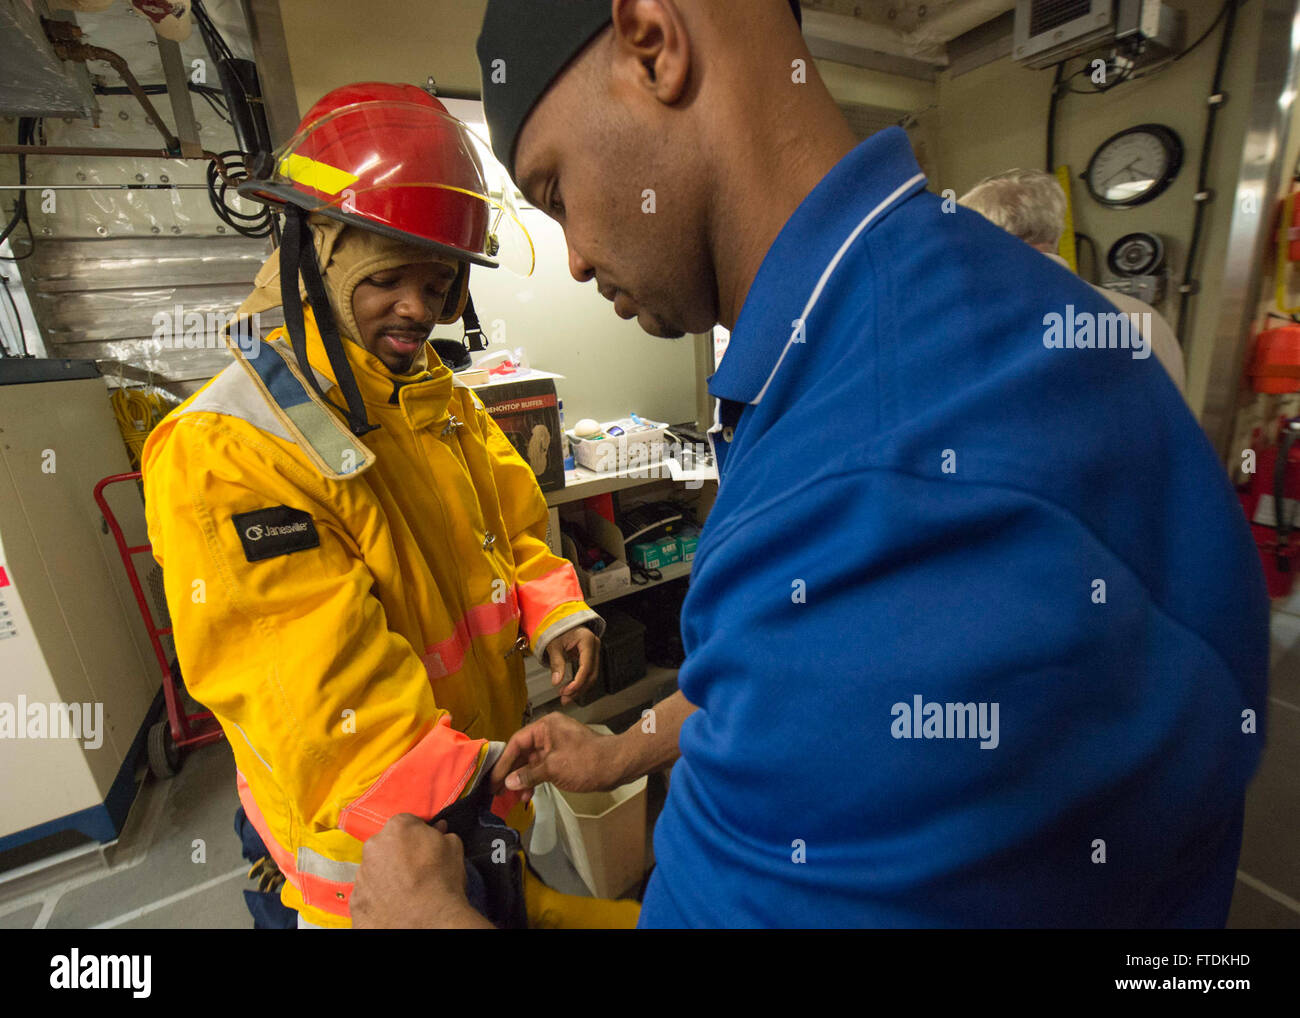 160125-N-QF605-010 ATLANTIC OCEAN (Jan. 25, 2016) - Cook Baker Irvine Cummings helps Able Bodied Seaman David Leader don his personal protective gear during a fire drill aboard USNS Spearhead (T-EPF 1) Jan. 25, 2016. The Military Sealift Command expeditionary fast transport vessel USNS Spearhead is on a scheduled deployment to the U.S. 6th Fleet area of operations to support the international collaborative capacity-building program Africa Partnership Station. (U.S. Navy photo by Mass Communication Specialist 1st Class Amanda Dunford/Released) Stock Photo